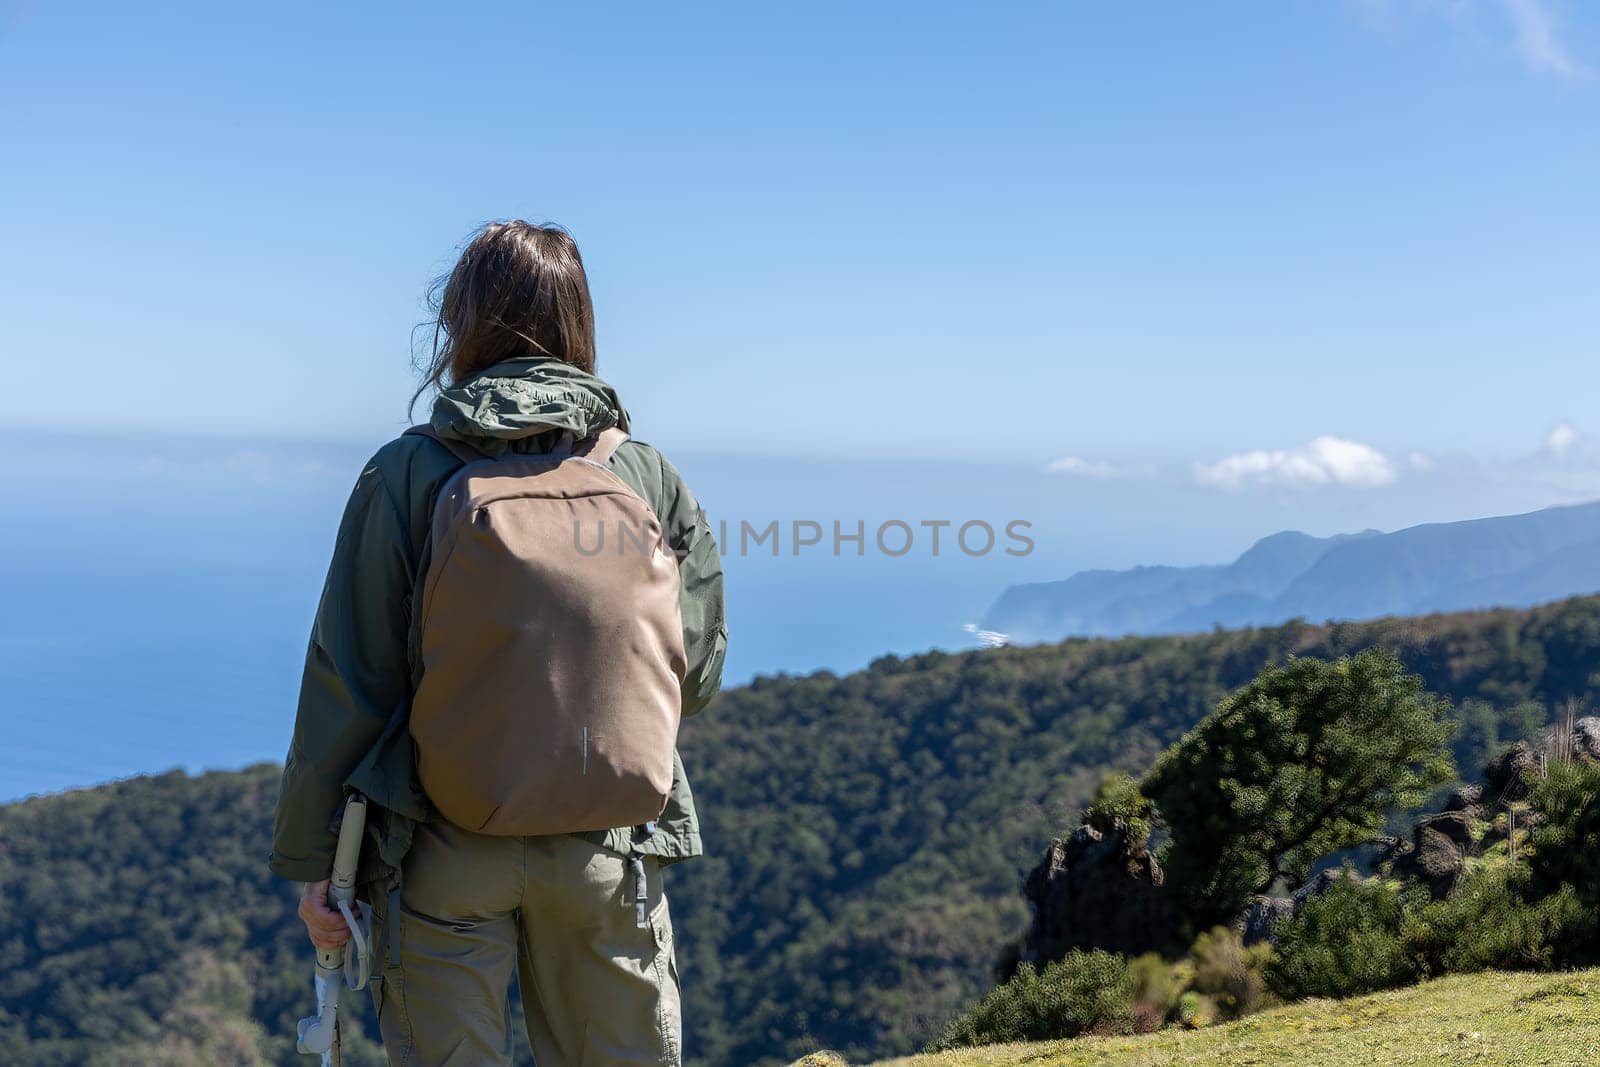 A woman with a backpack taking in the majestic view of a coastal landscape